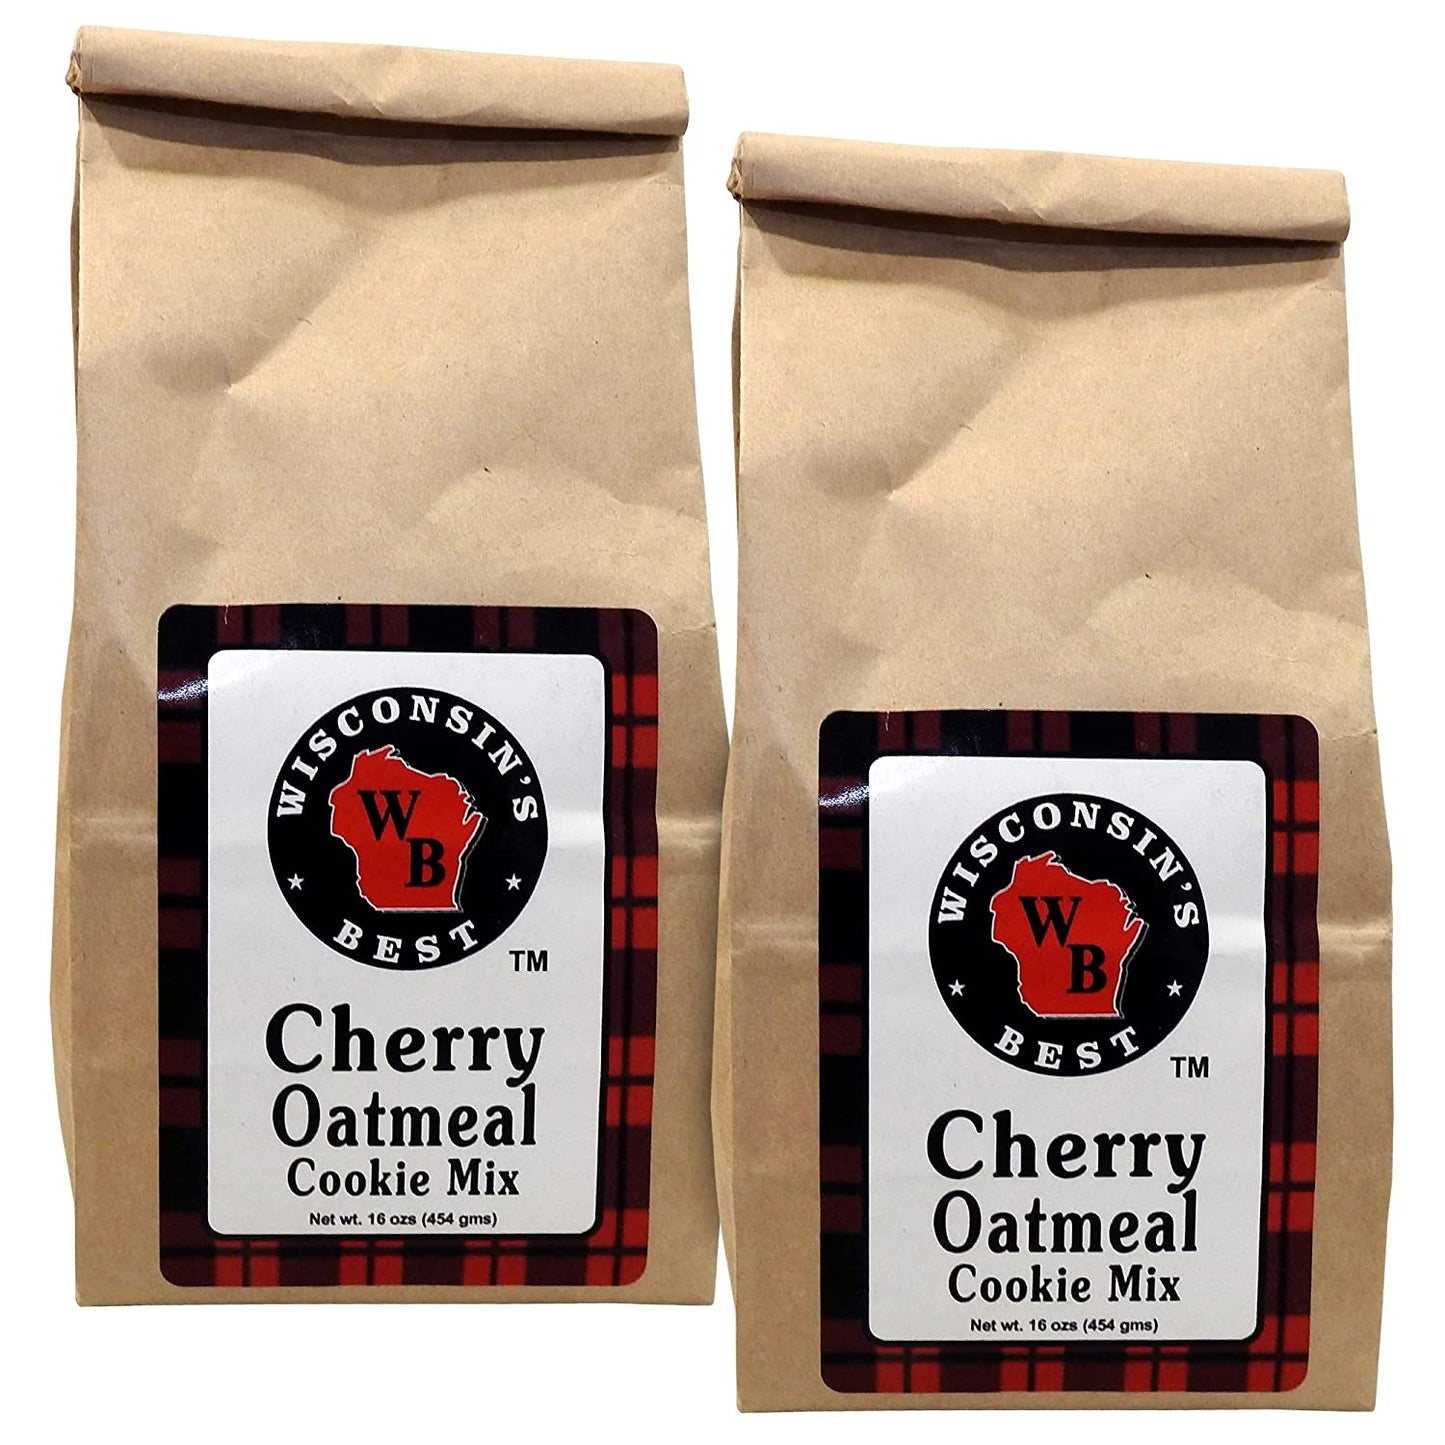 Wisconsin's Best Cherry Oatmeal Cookie Mix